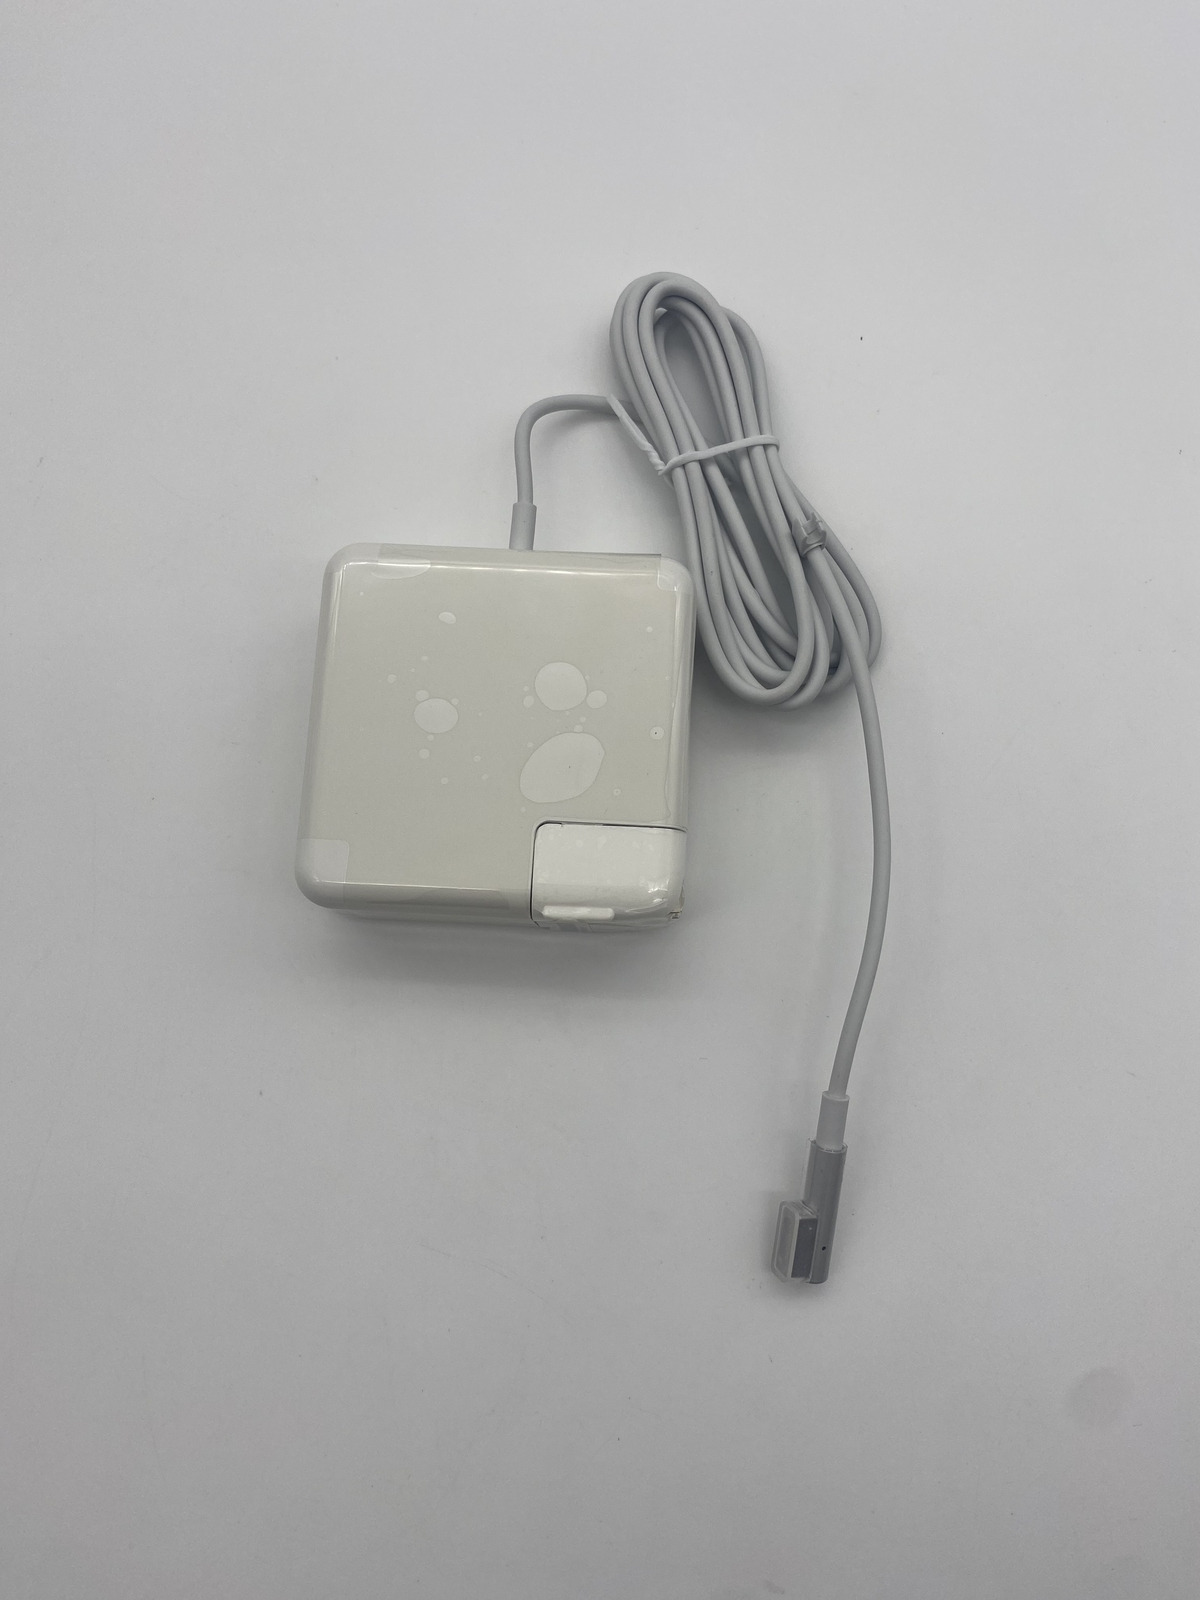 REPLACEMENT 45W POWER ADAPTER CONNECTOR CHARGER FOR OLD MACBOOK PRO